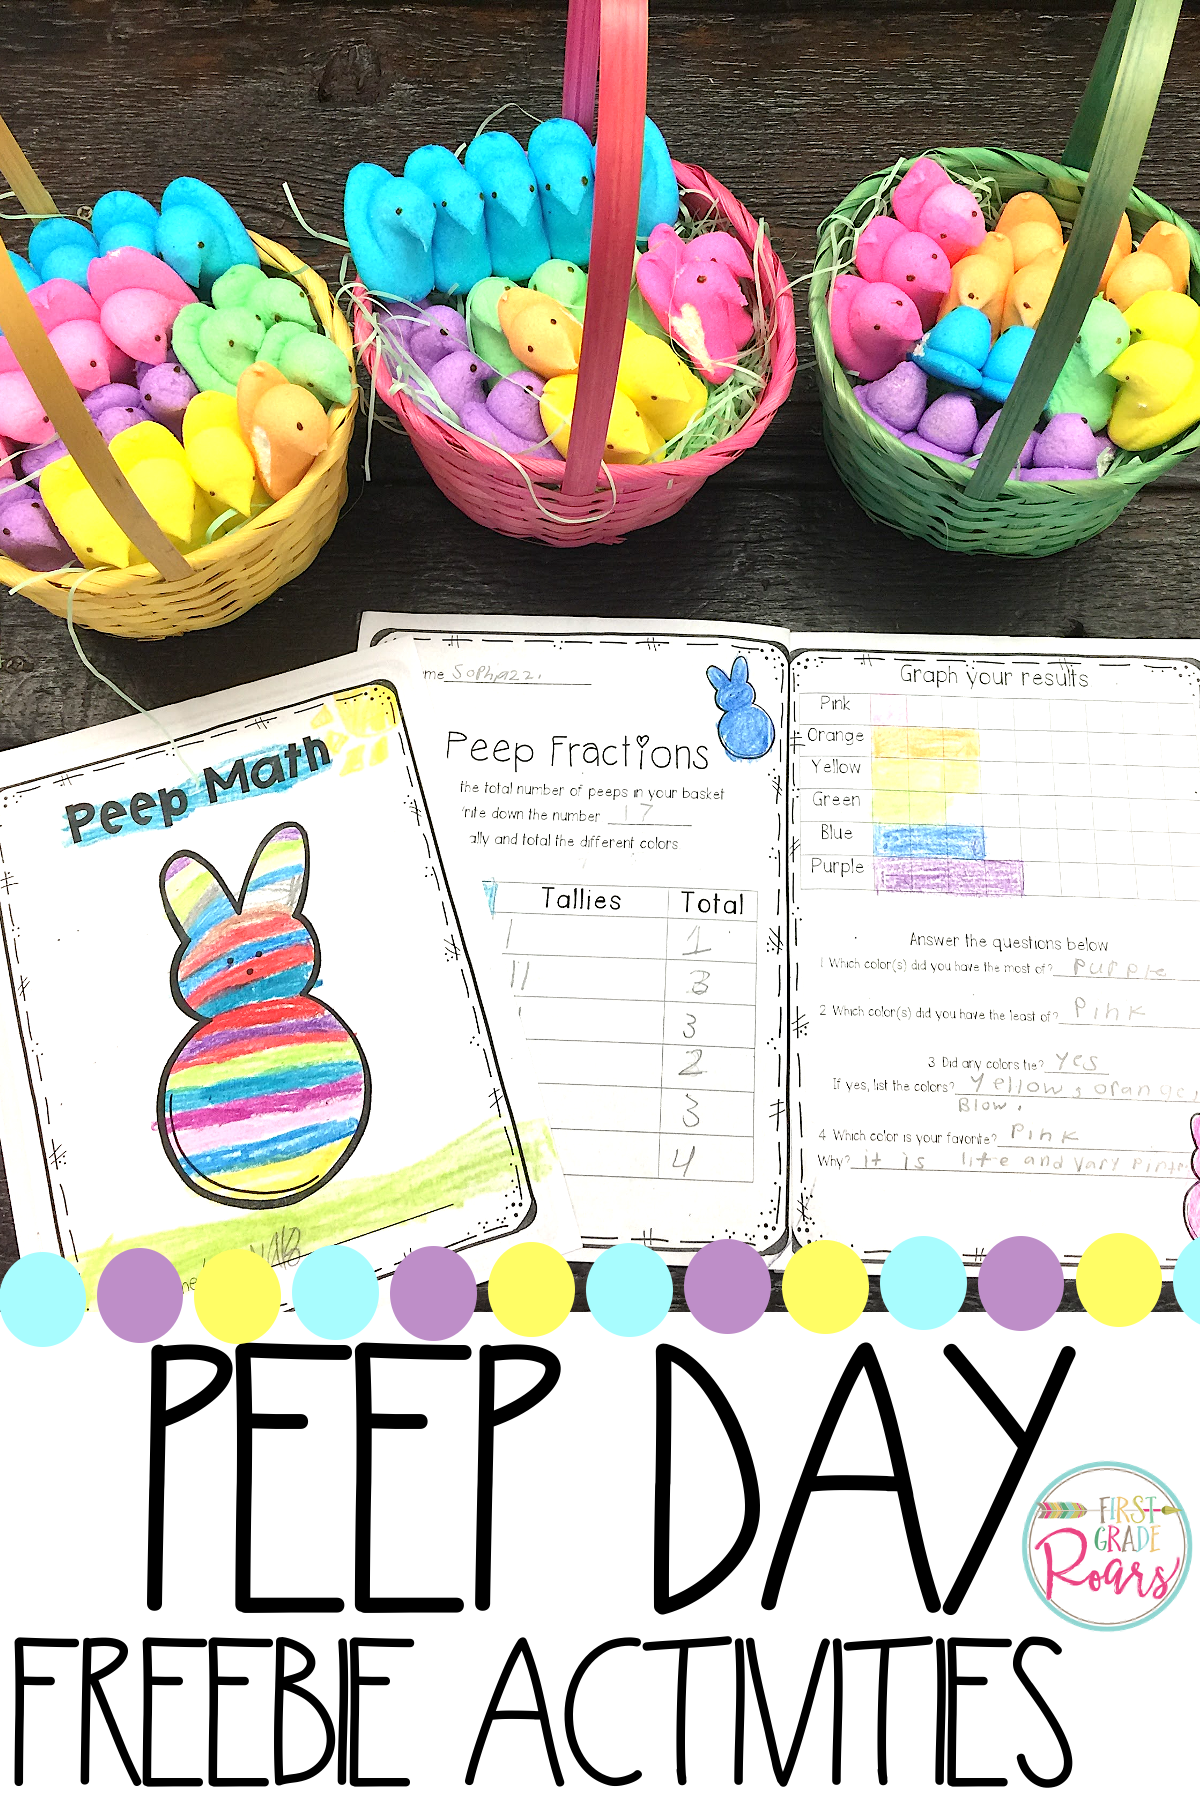 5 fun FREE Spring bunny, chick, and Peep activities. Lots of graphing fun with candy to enjoy as well. Certificates to reward positive achievements.